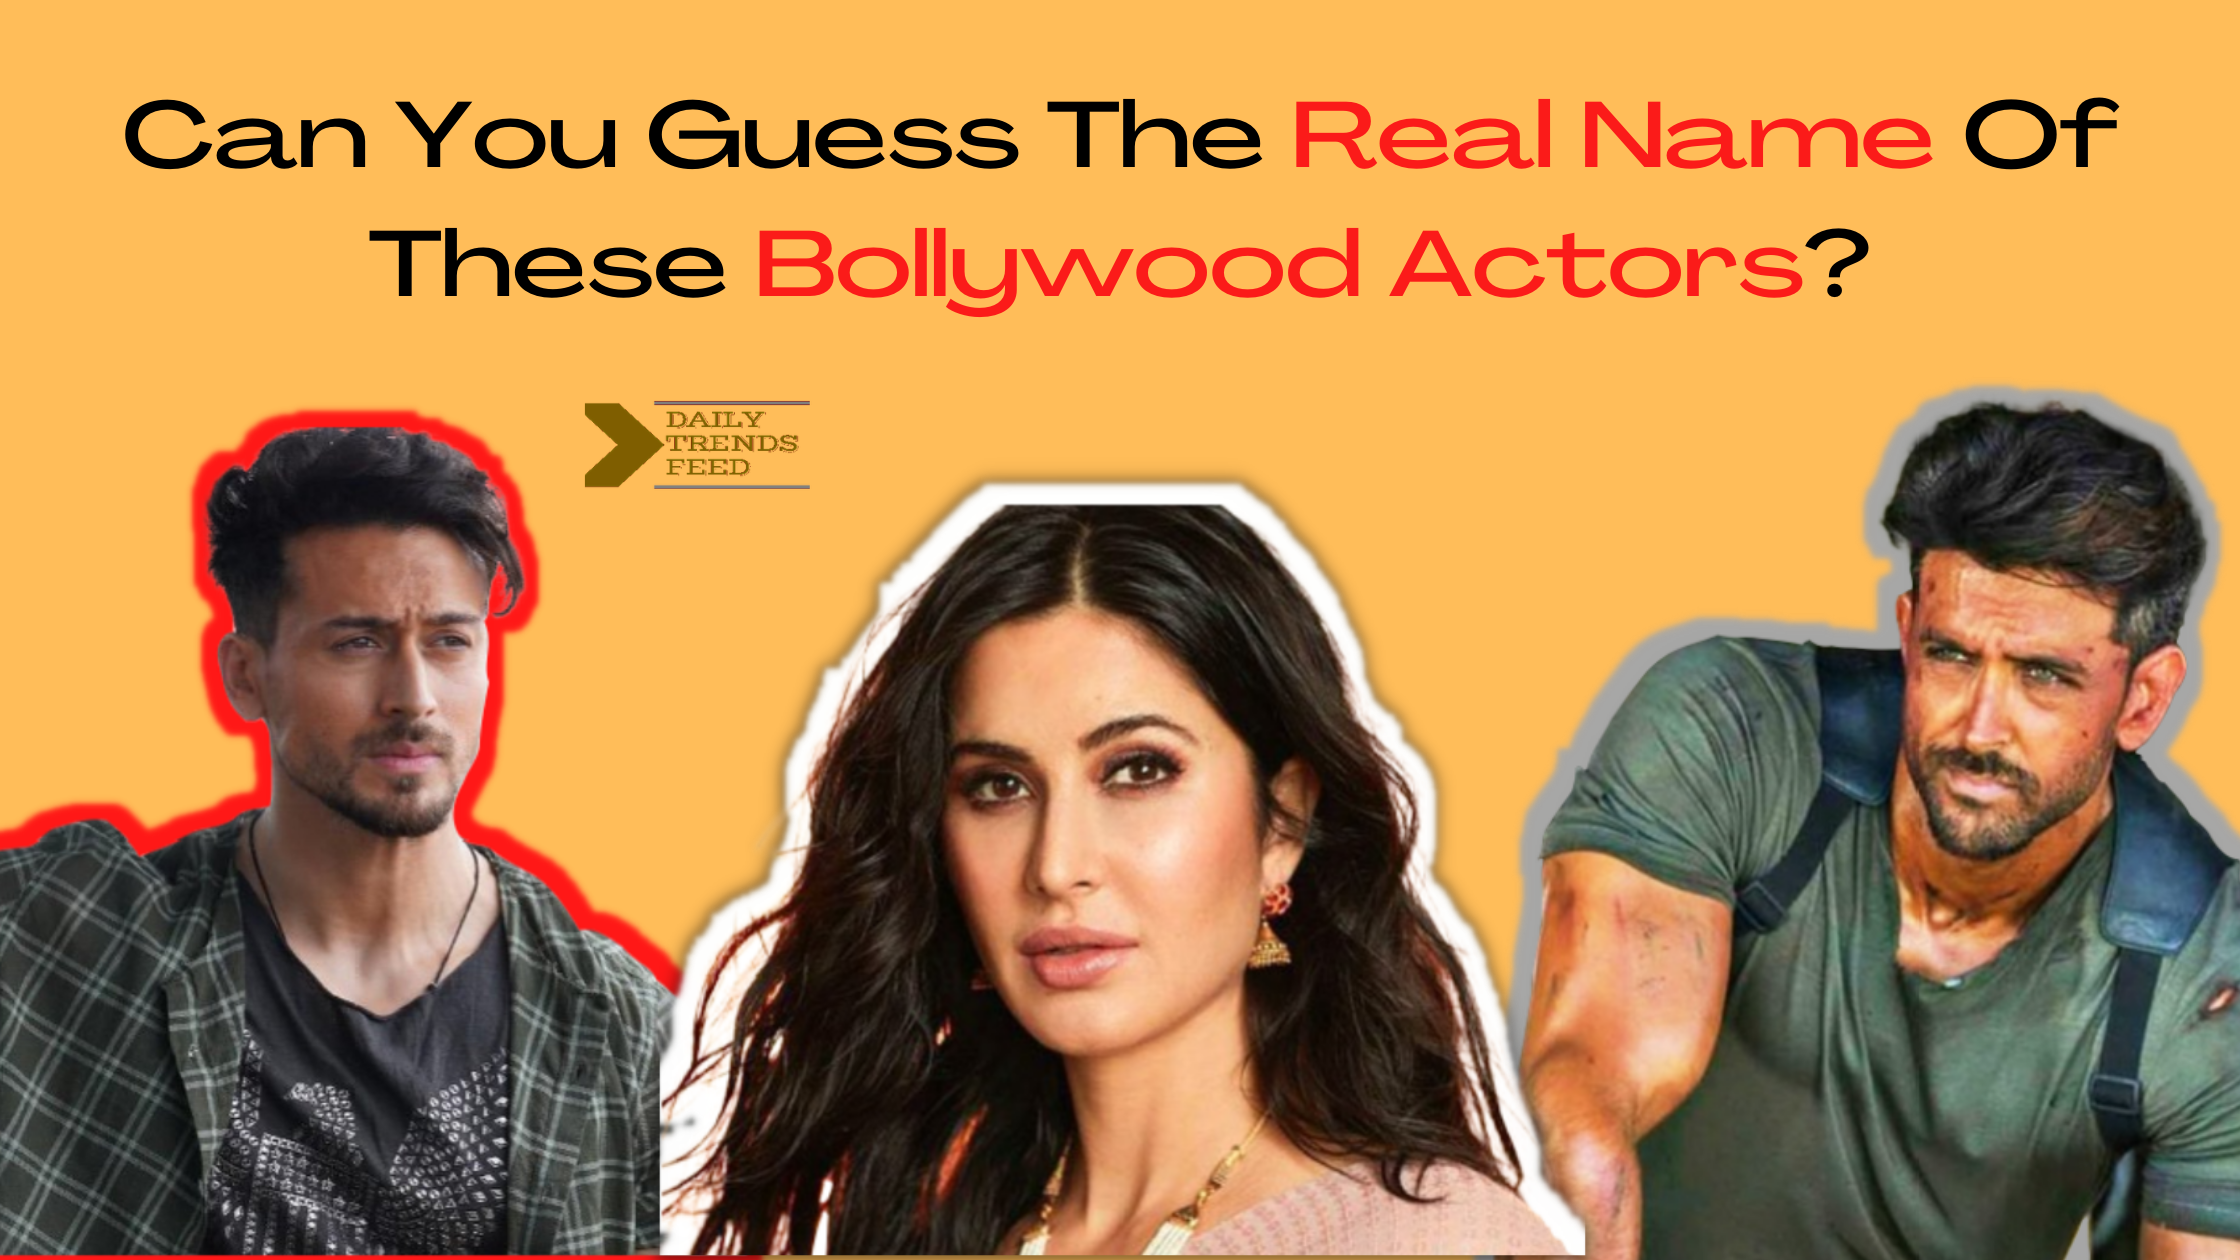 Bollywood Actors Quiz: Can You Guess The Real Name Of These Bollywood Actors?